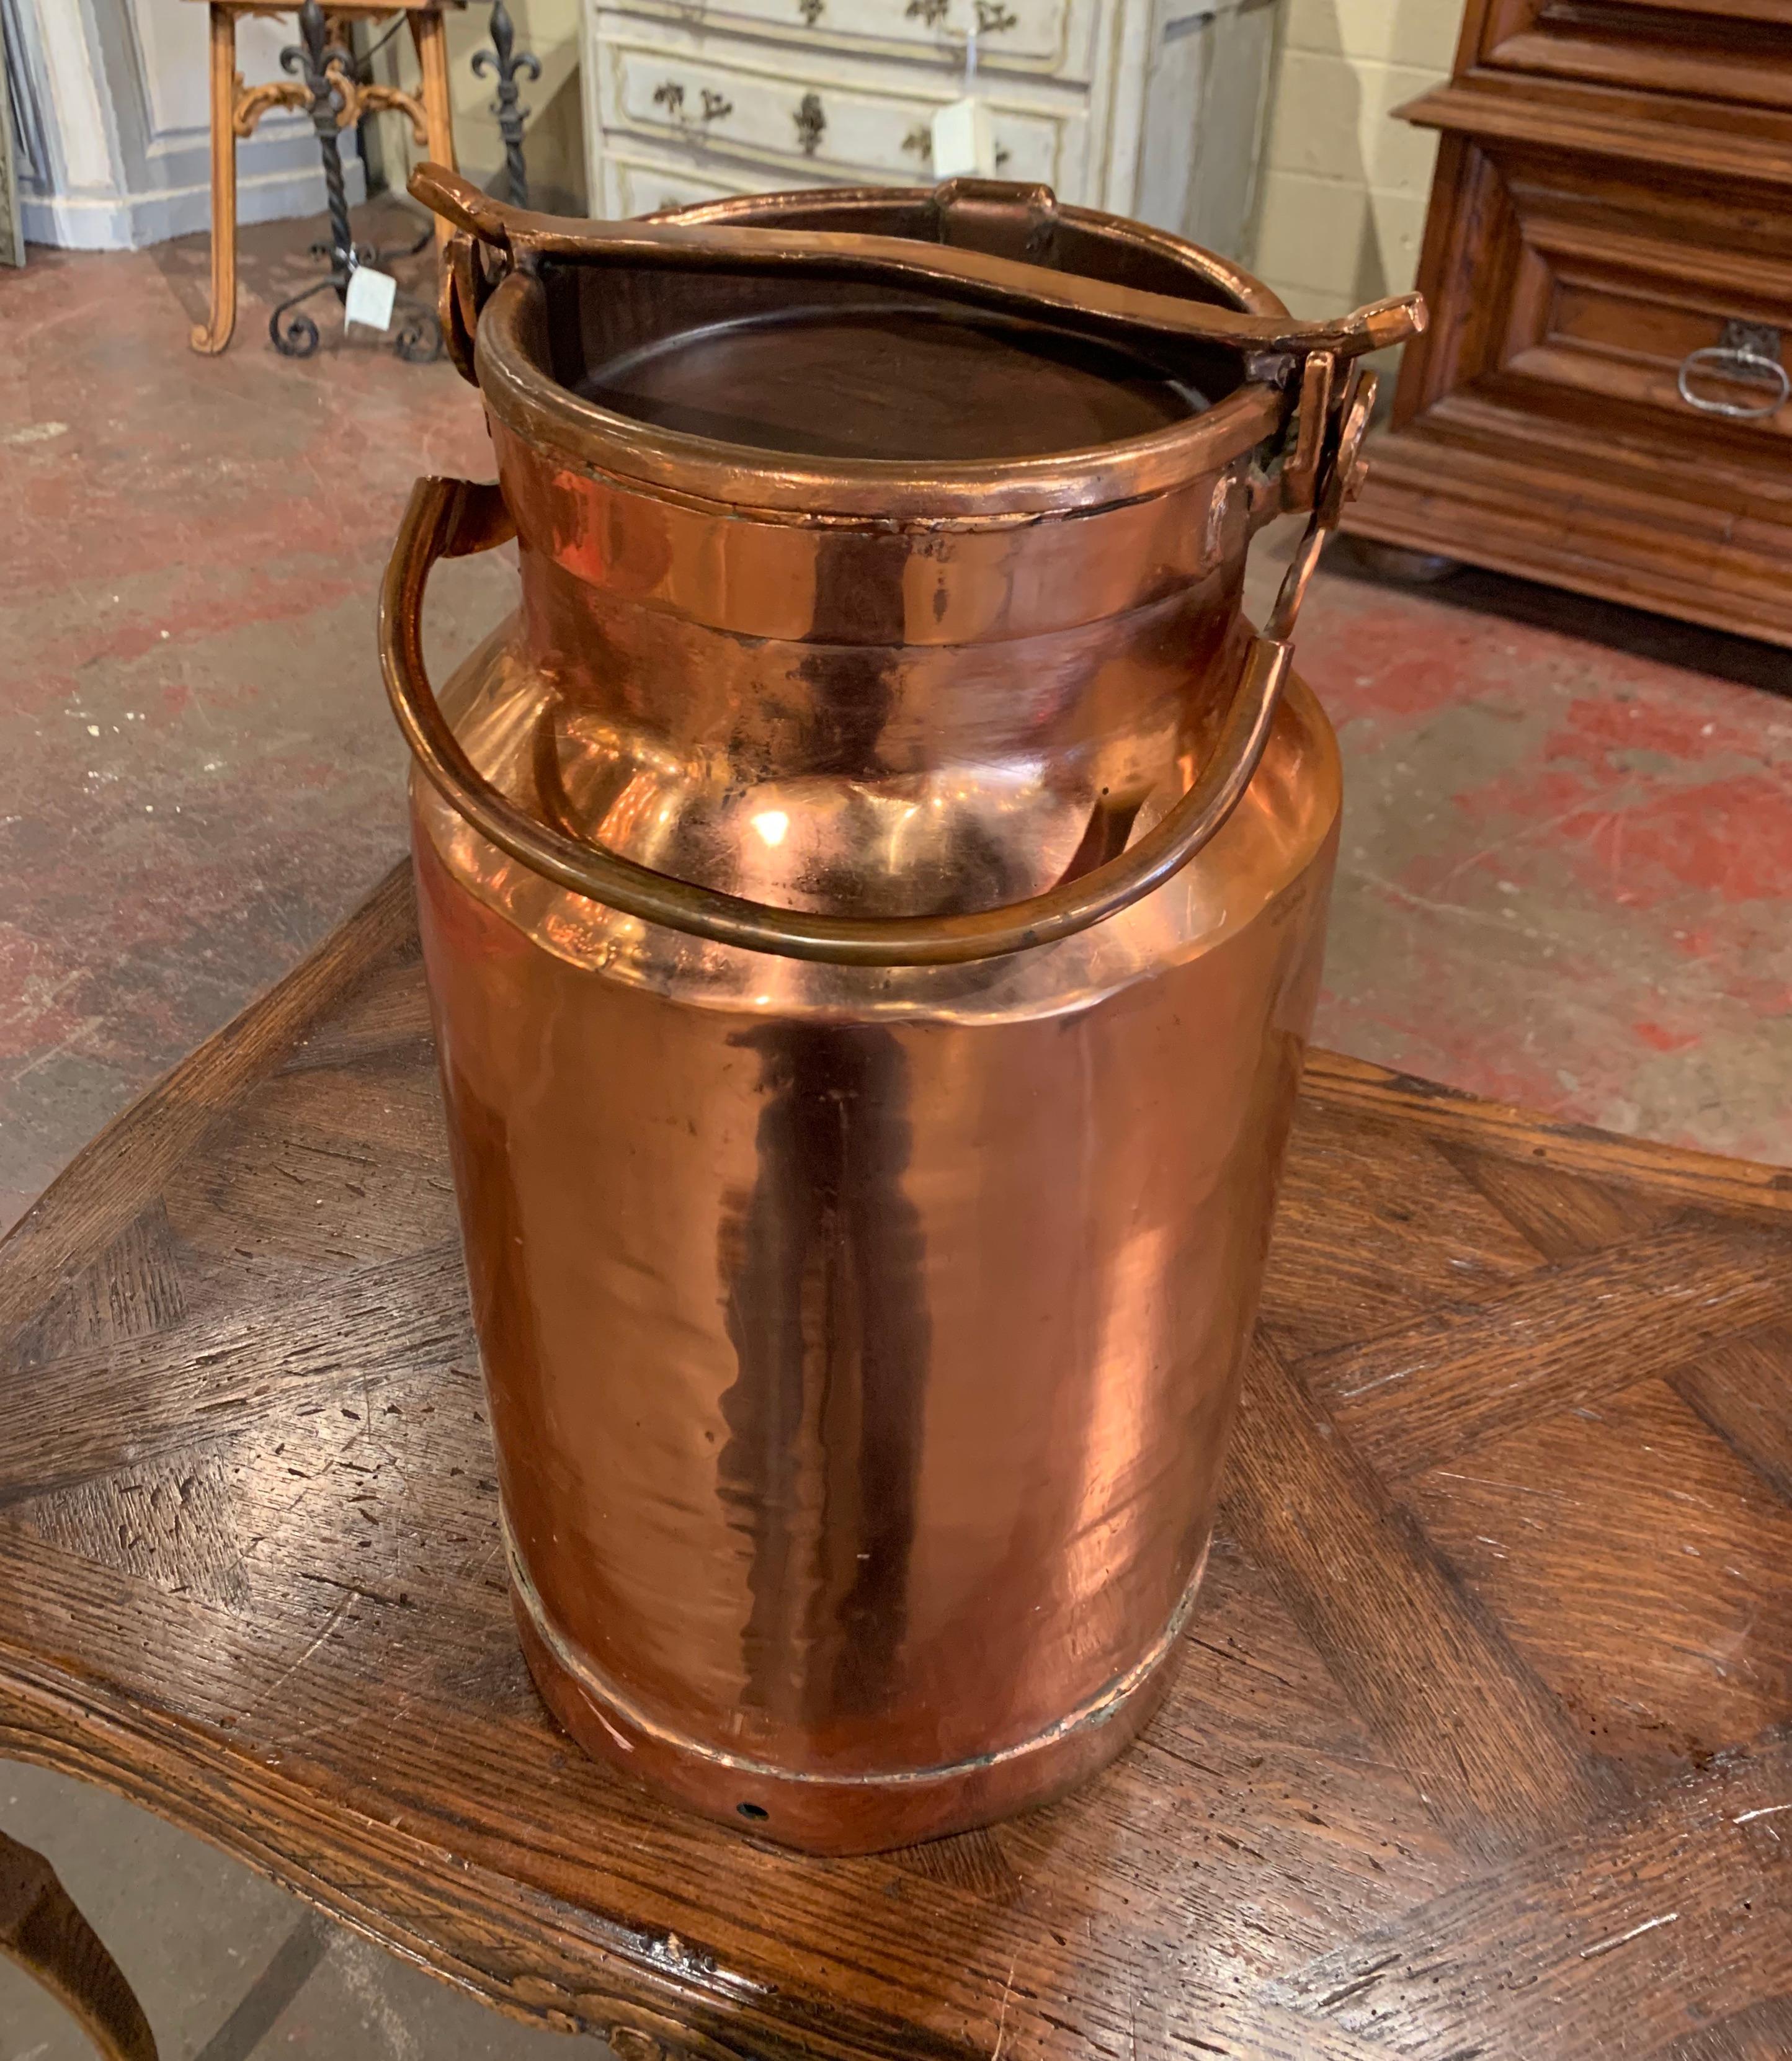 Use this beautiful antique milk can as an umbrella stand by your front door. Crafted in France circa 1880, the tall copper container has side handles and its original removable top. The large and heavy pot is in excellent condition with a few dents,